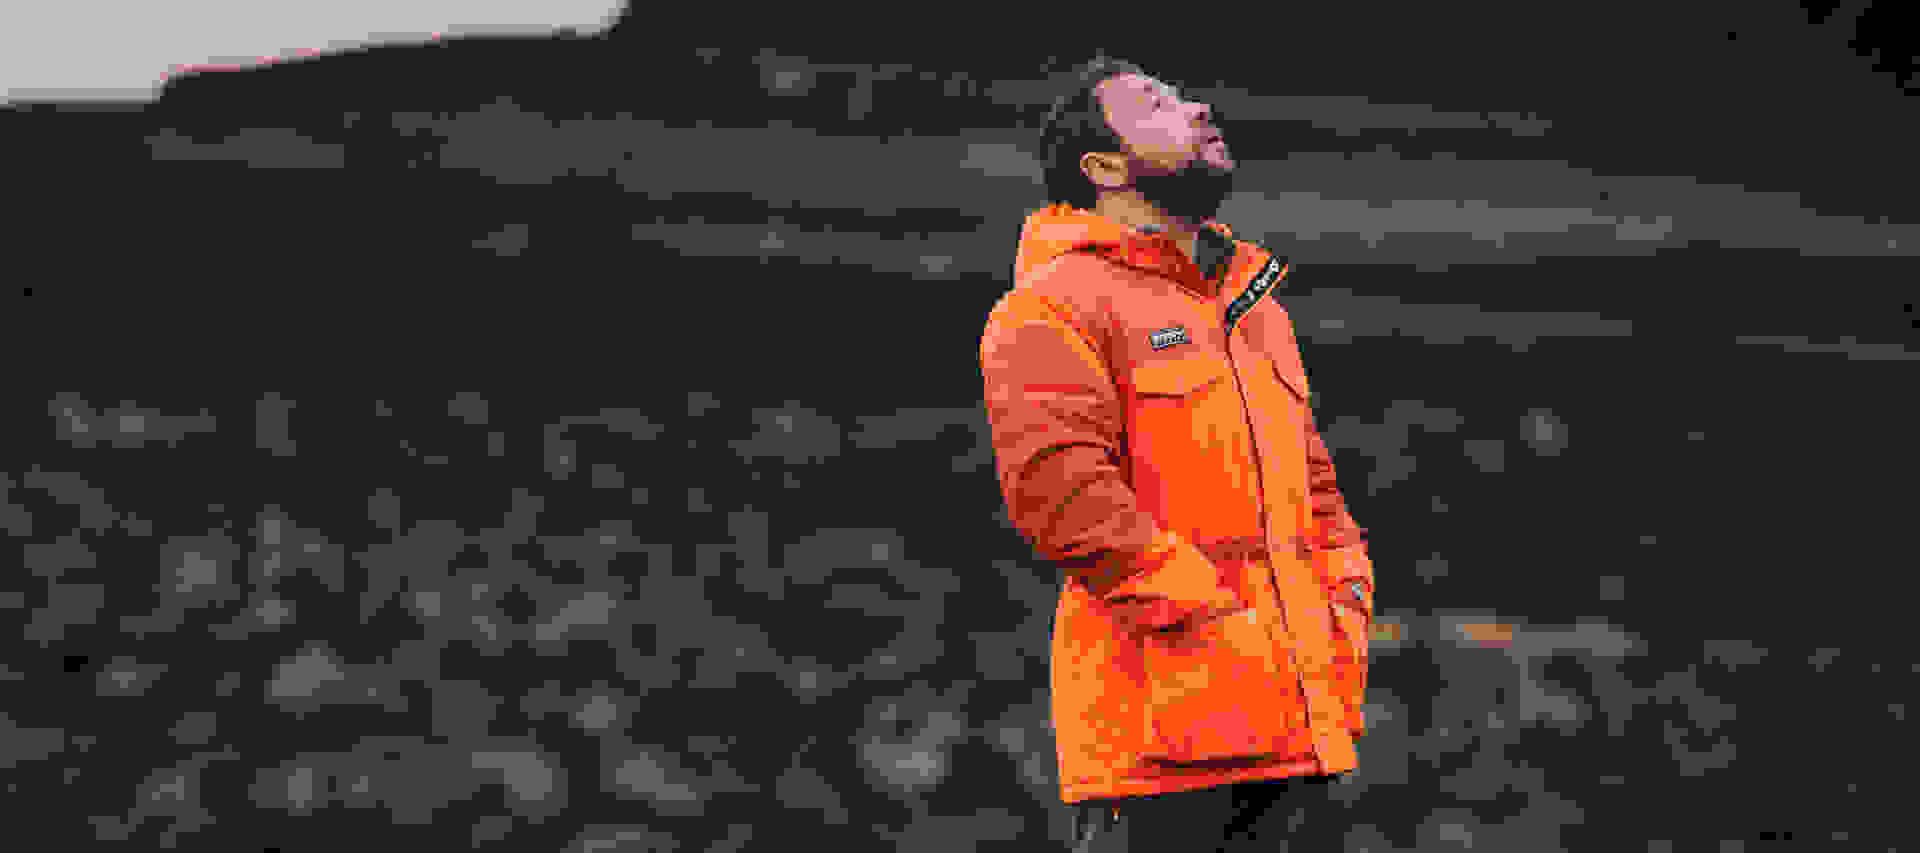 Stephen Graham stands in a stark Icelandic landscape, wearing an orange adidas Speizal jacket and gazing up at the sky.